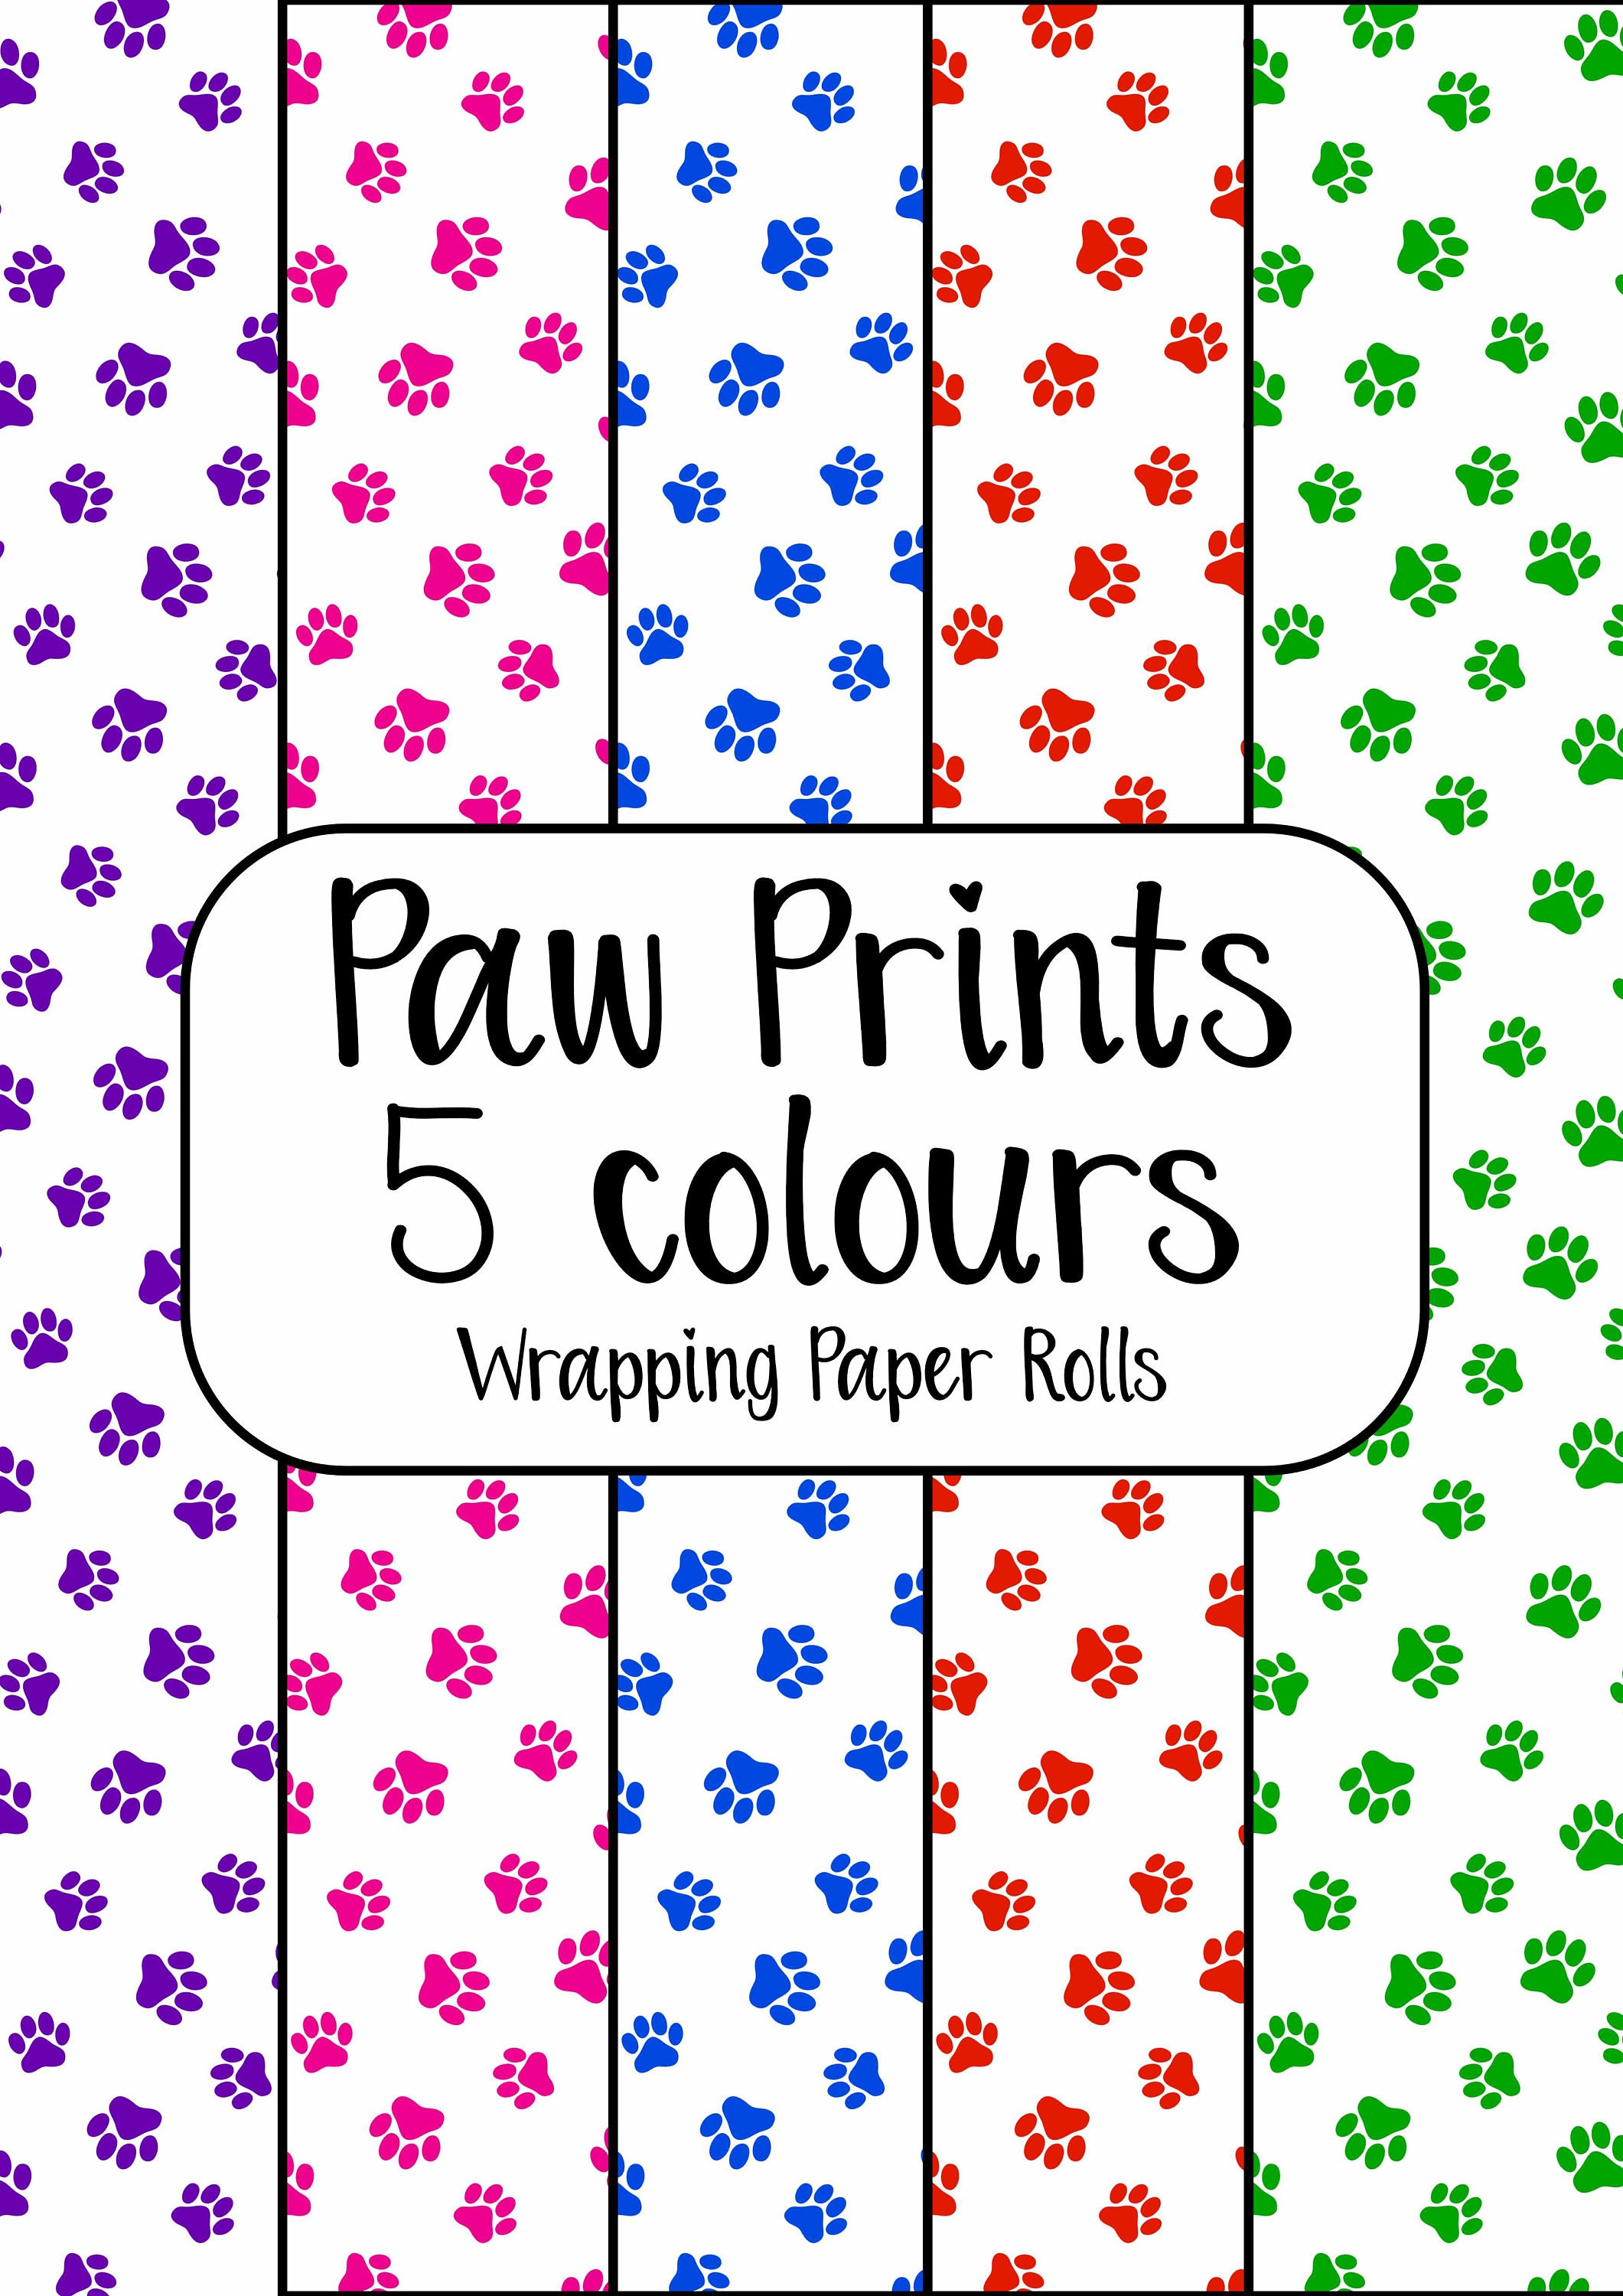 Colourful Paw prints wrapping paper A3 eco friendly thick quality gift wrap  Christmas Birthday dog cat pet animal lover present wrap present